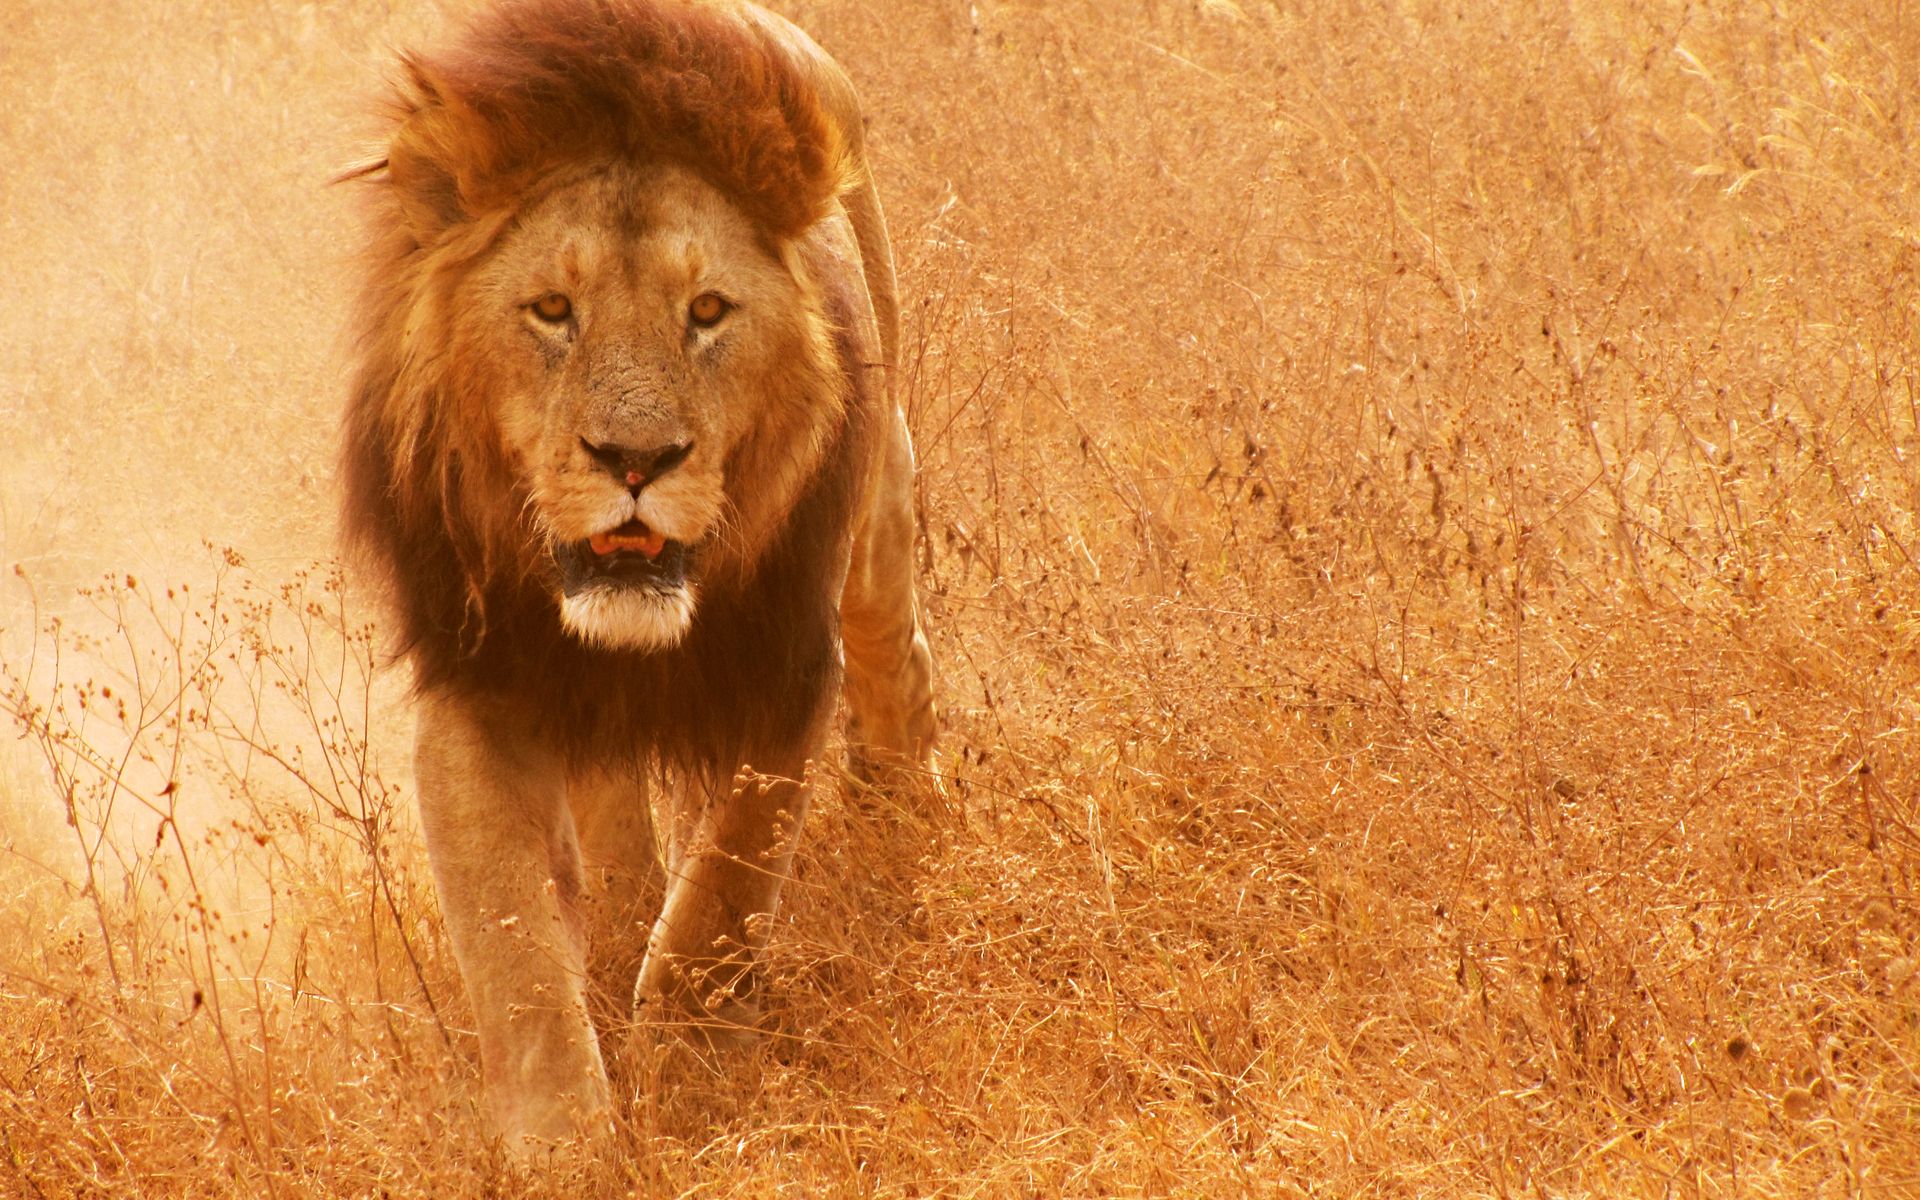 HD wallpaper, Lion, African, Pictures